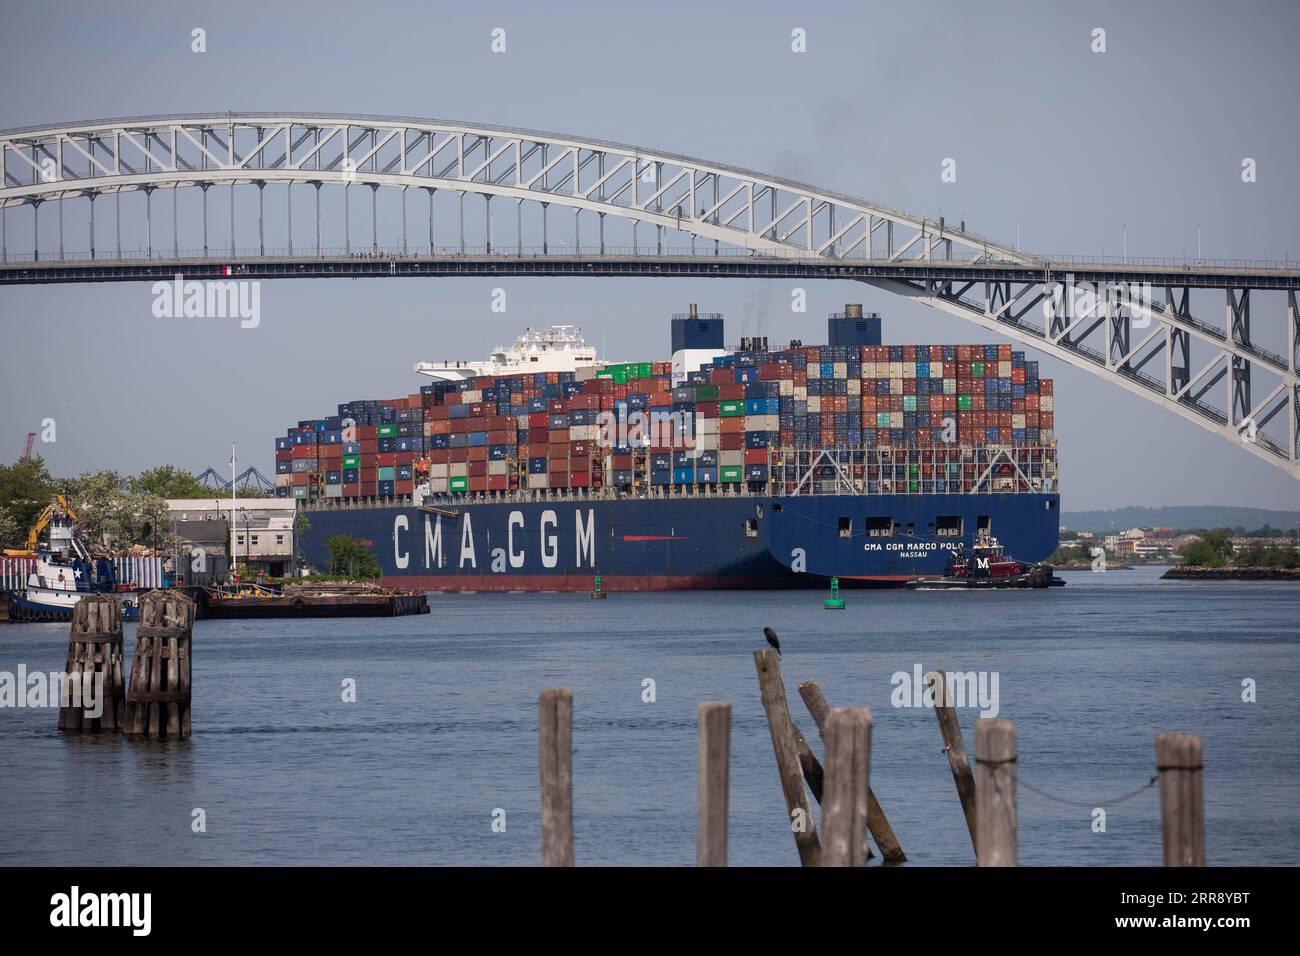 210520 -- NEW YORK, May 20, 2021 -- CMA CGM Marco Polo container ship travels near the Bayonne Bridge in New York, the United States, on May 20, 2021. The U.S. East Coast witnessed the arrival of the record-breaking container ship on Thursday morning amid booming international shipping business. CMA CGM Marco Polo, with a maximum capacity of 16,022 twenty-foot equivalent units TEU, arrived at Elizabeth Port Authority Marine Terminal in New Jersey as the largest container ship ever to call at any U.S. East Coast port, said a release by the Port Authority of New York and New Jersey. Photo by /Xi Stock Photo